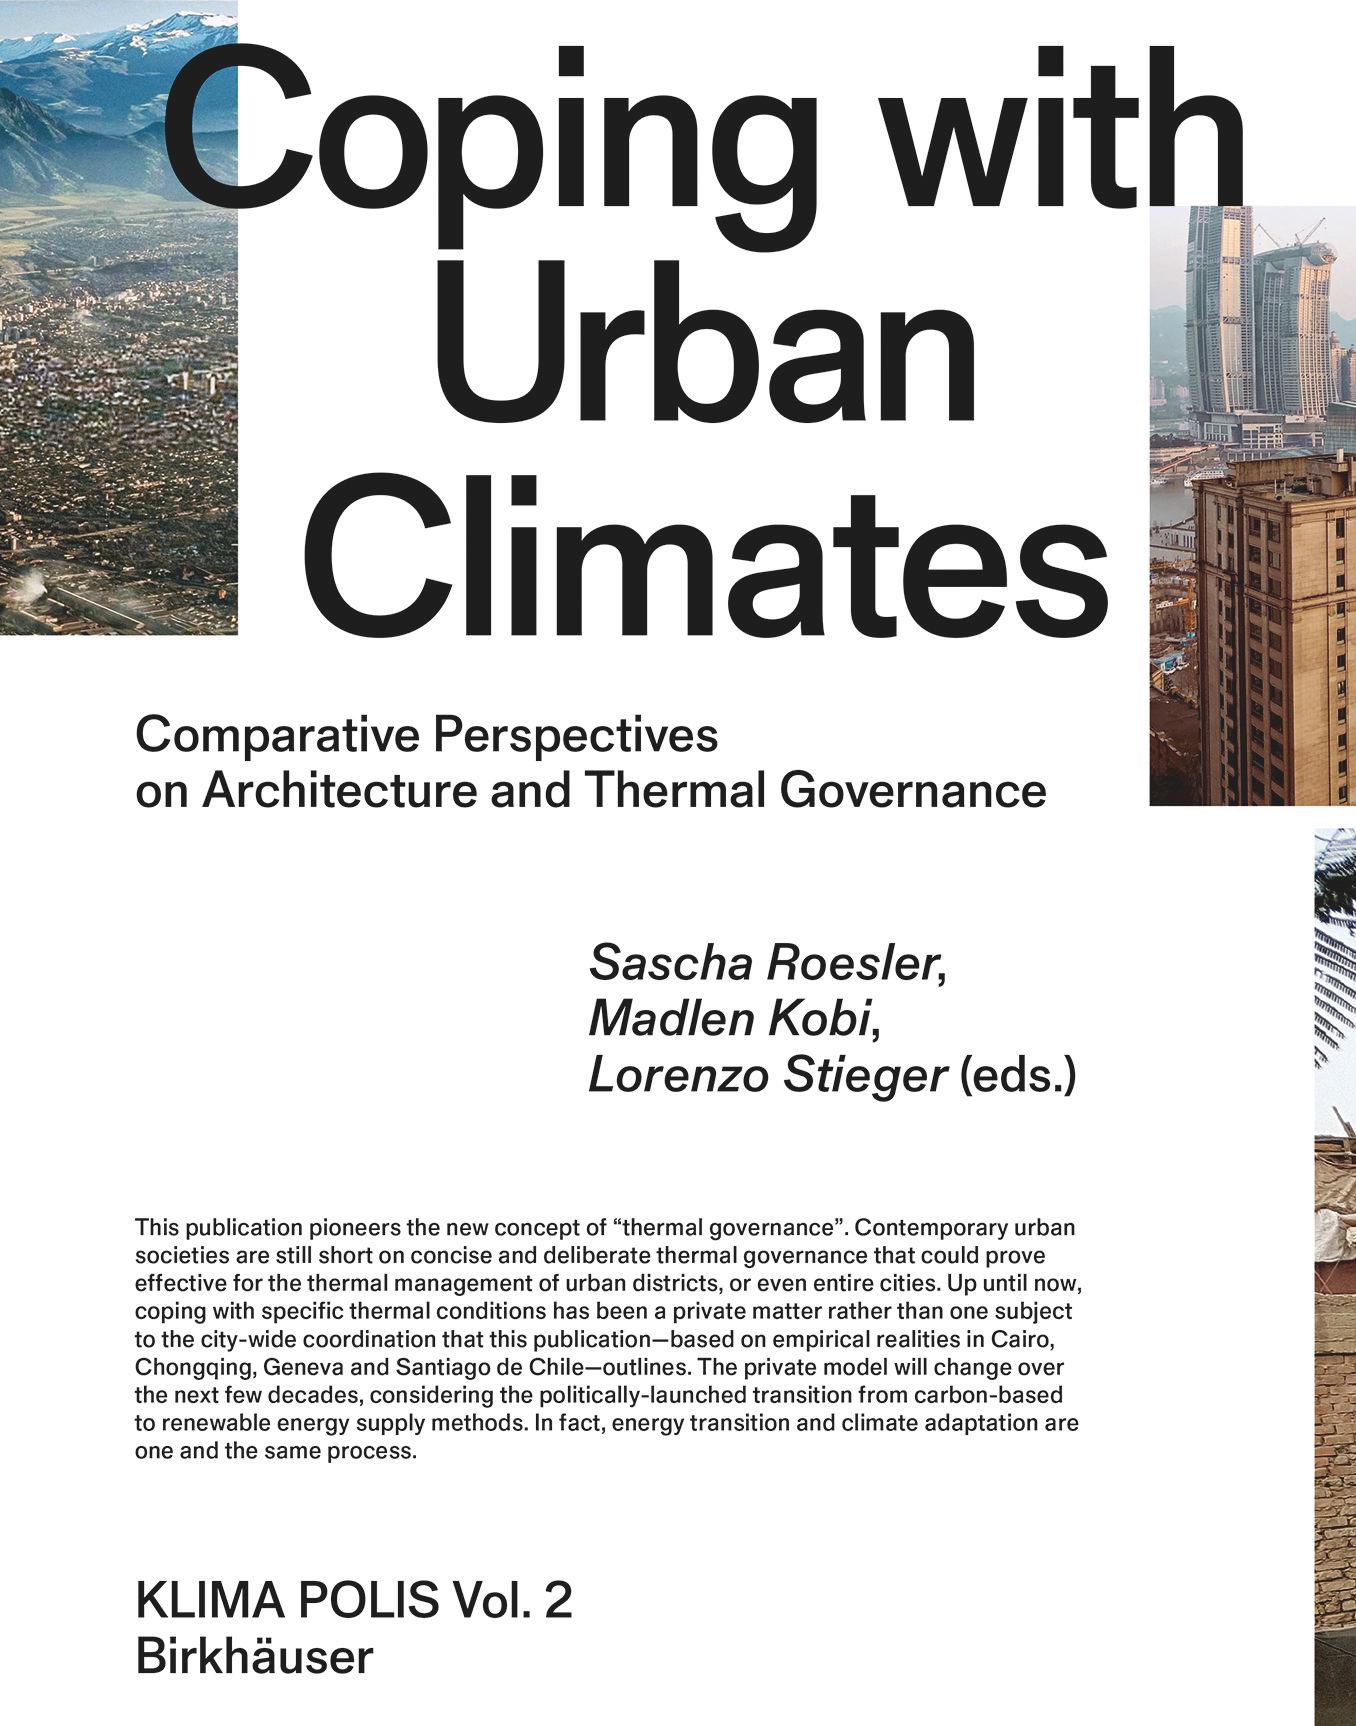 Coping with Urban Climates's cover